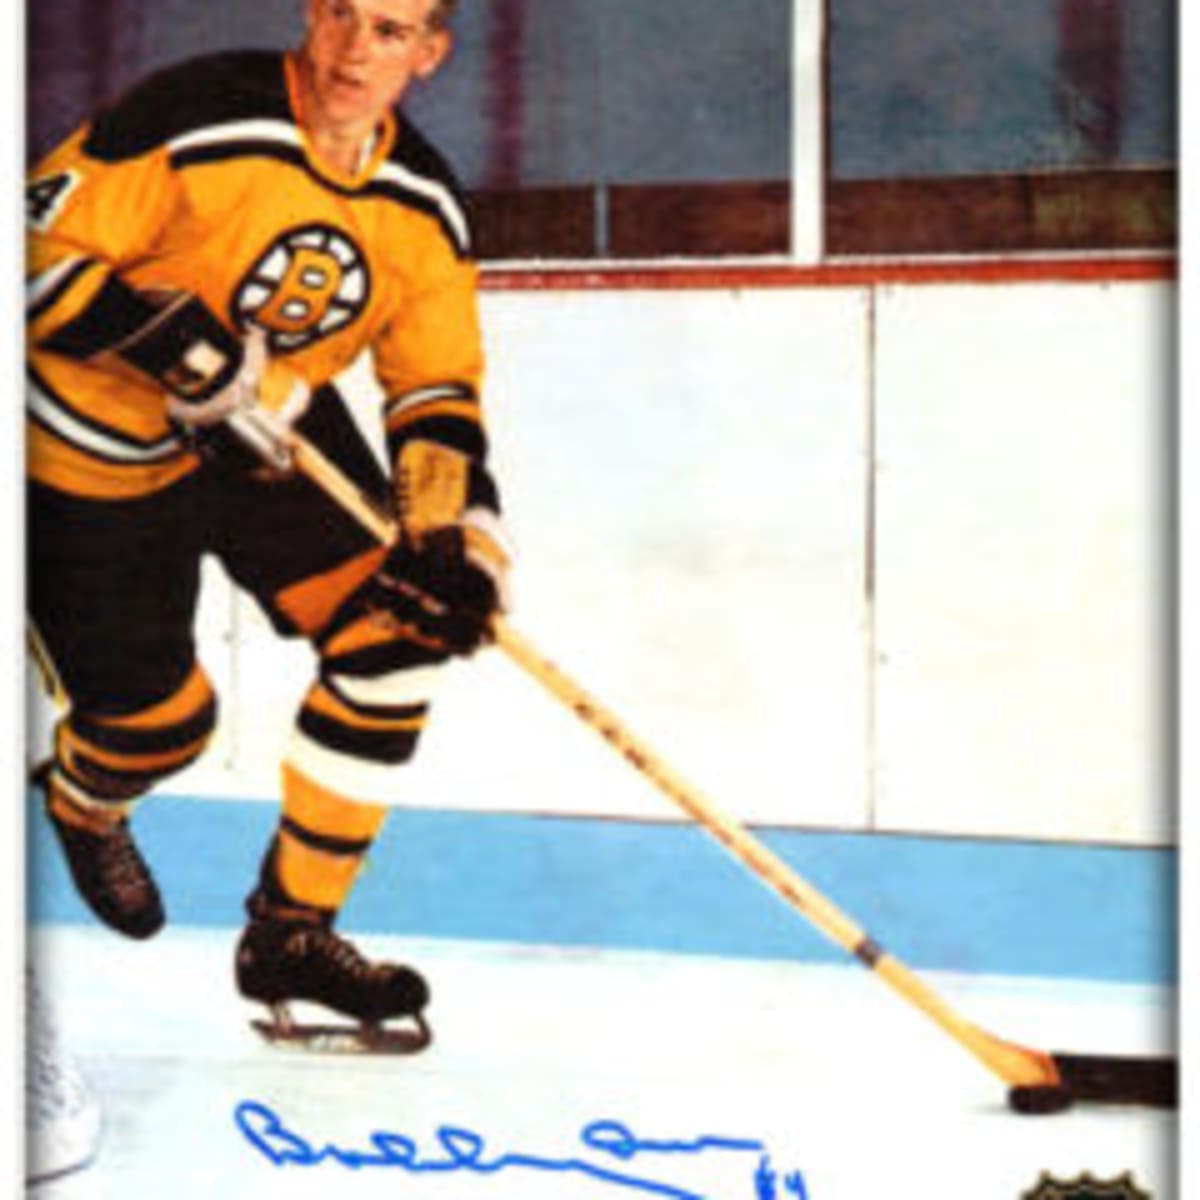 Pay homage to hockey legend Bobby Orr at TD Garden